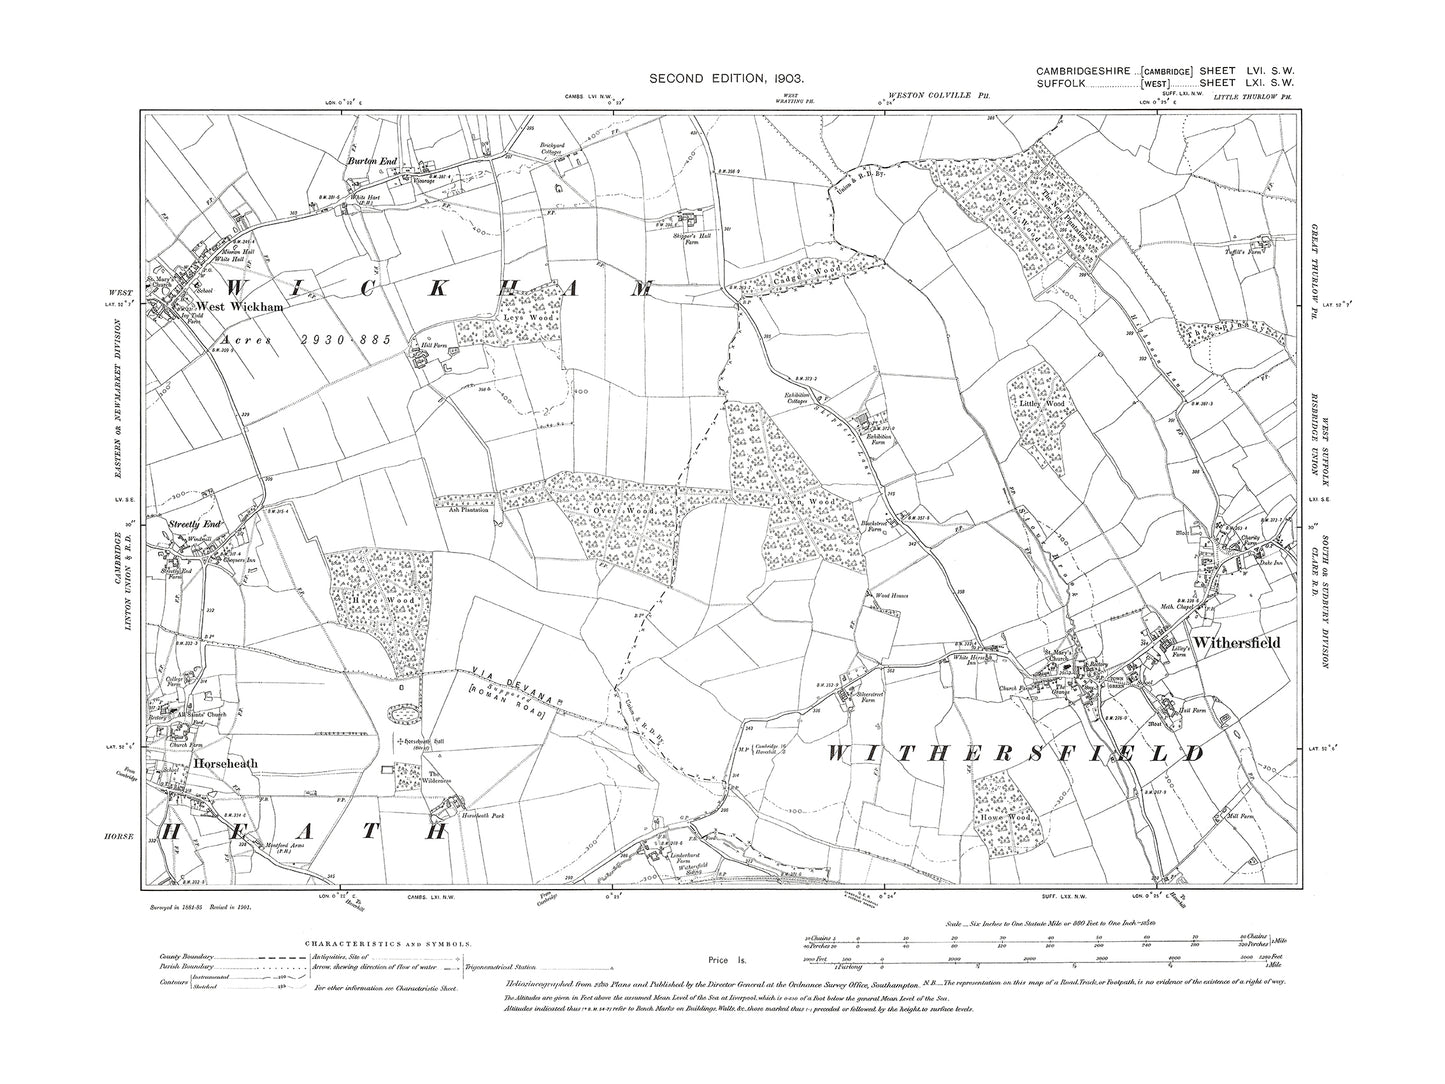 Old OS map dated 1903, showing Horseheath (east), West Wickham (east) in Cambridgeshire 56SW